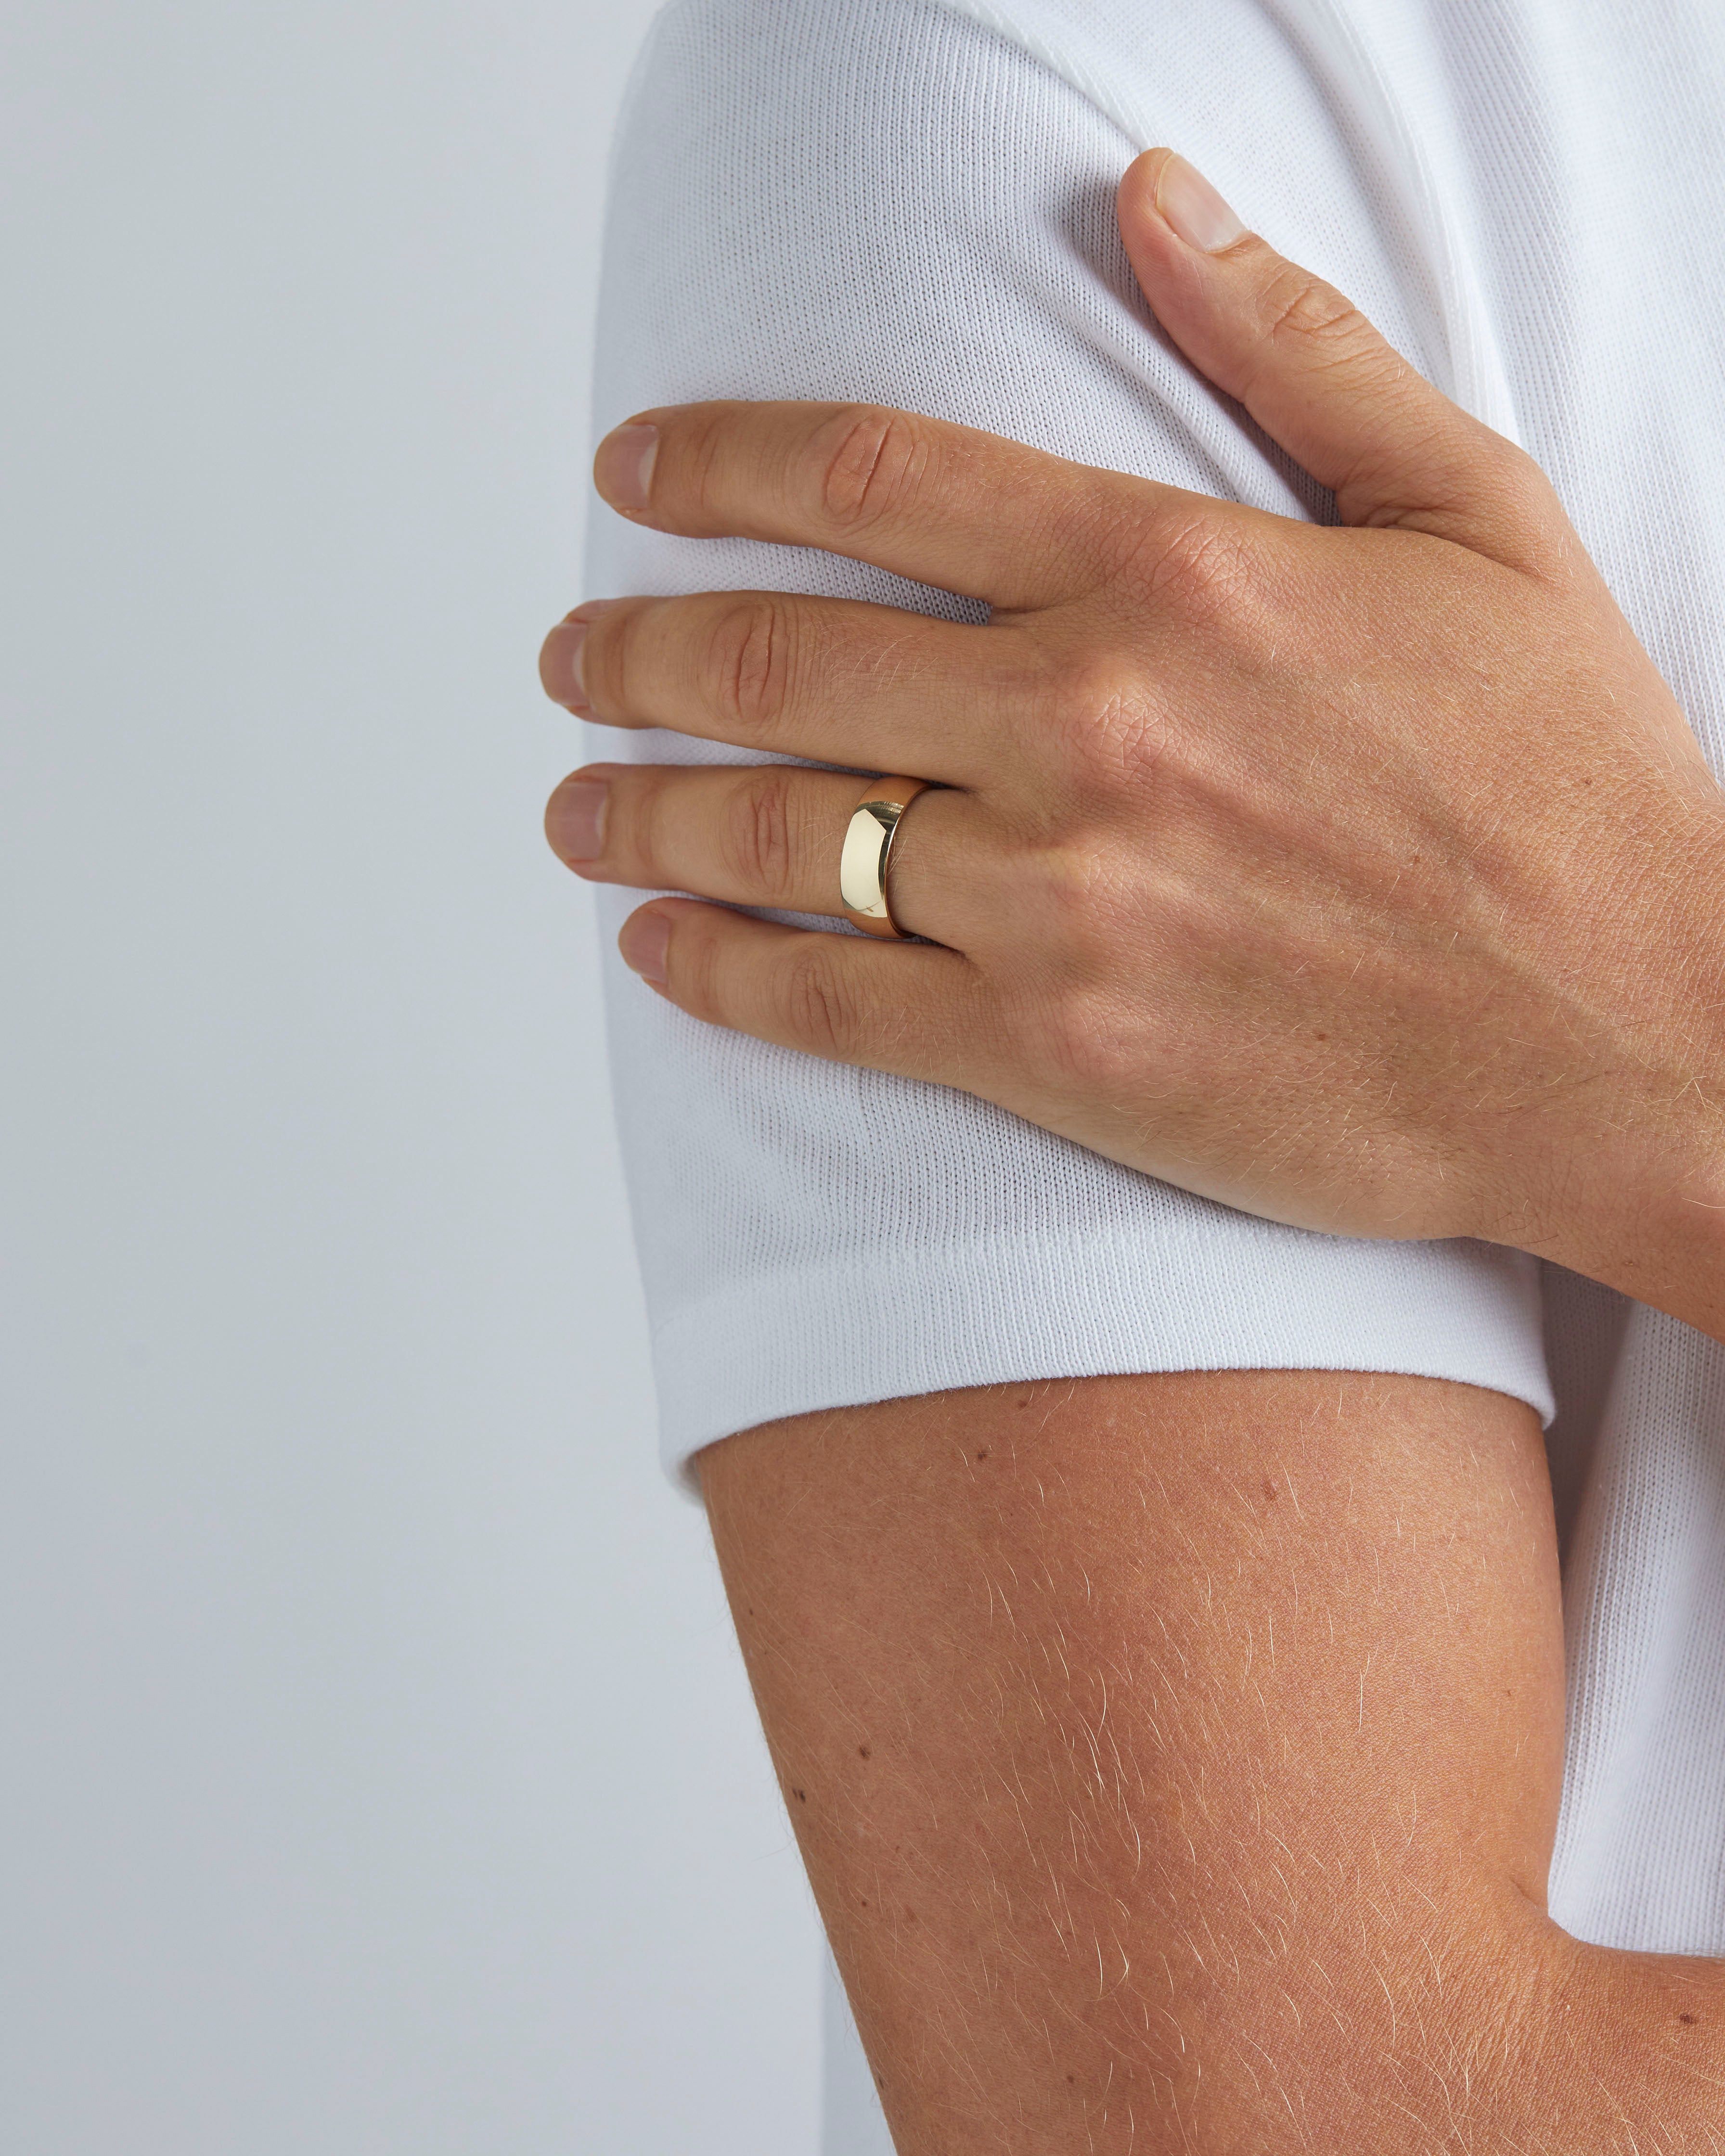 A model wears our 7mm classic heavy wedding ring in yellow gold